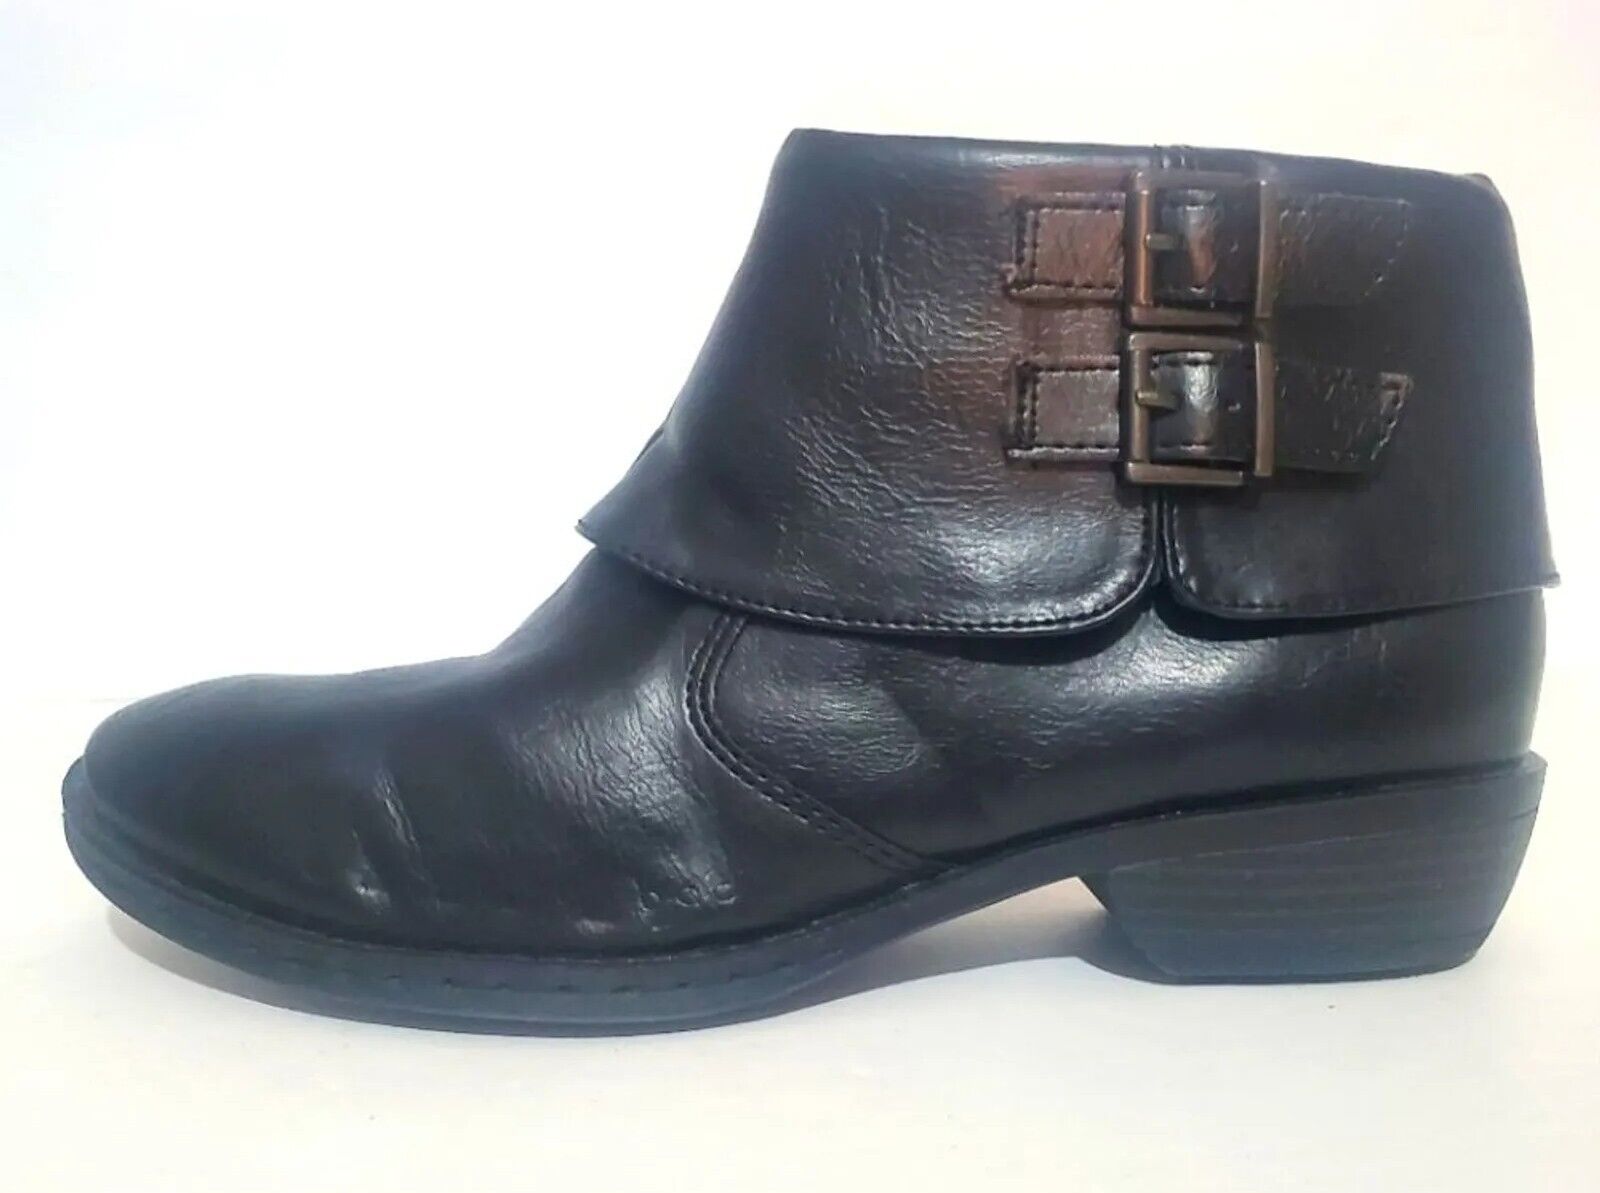 b.o.c. black leather moto fold over cuff double buckle low heel booties. 8